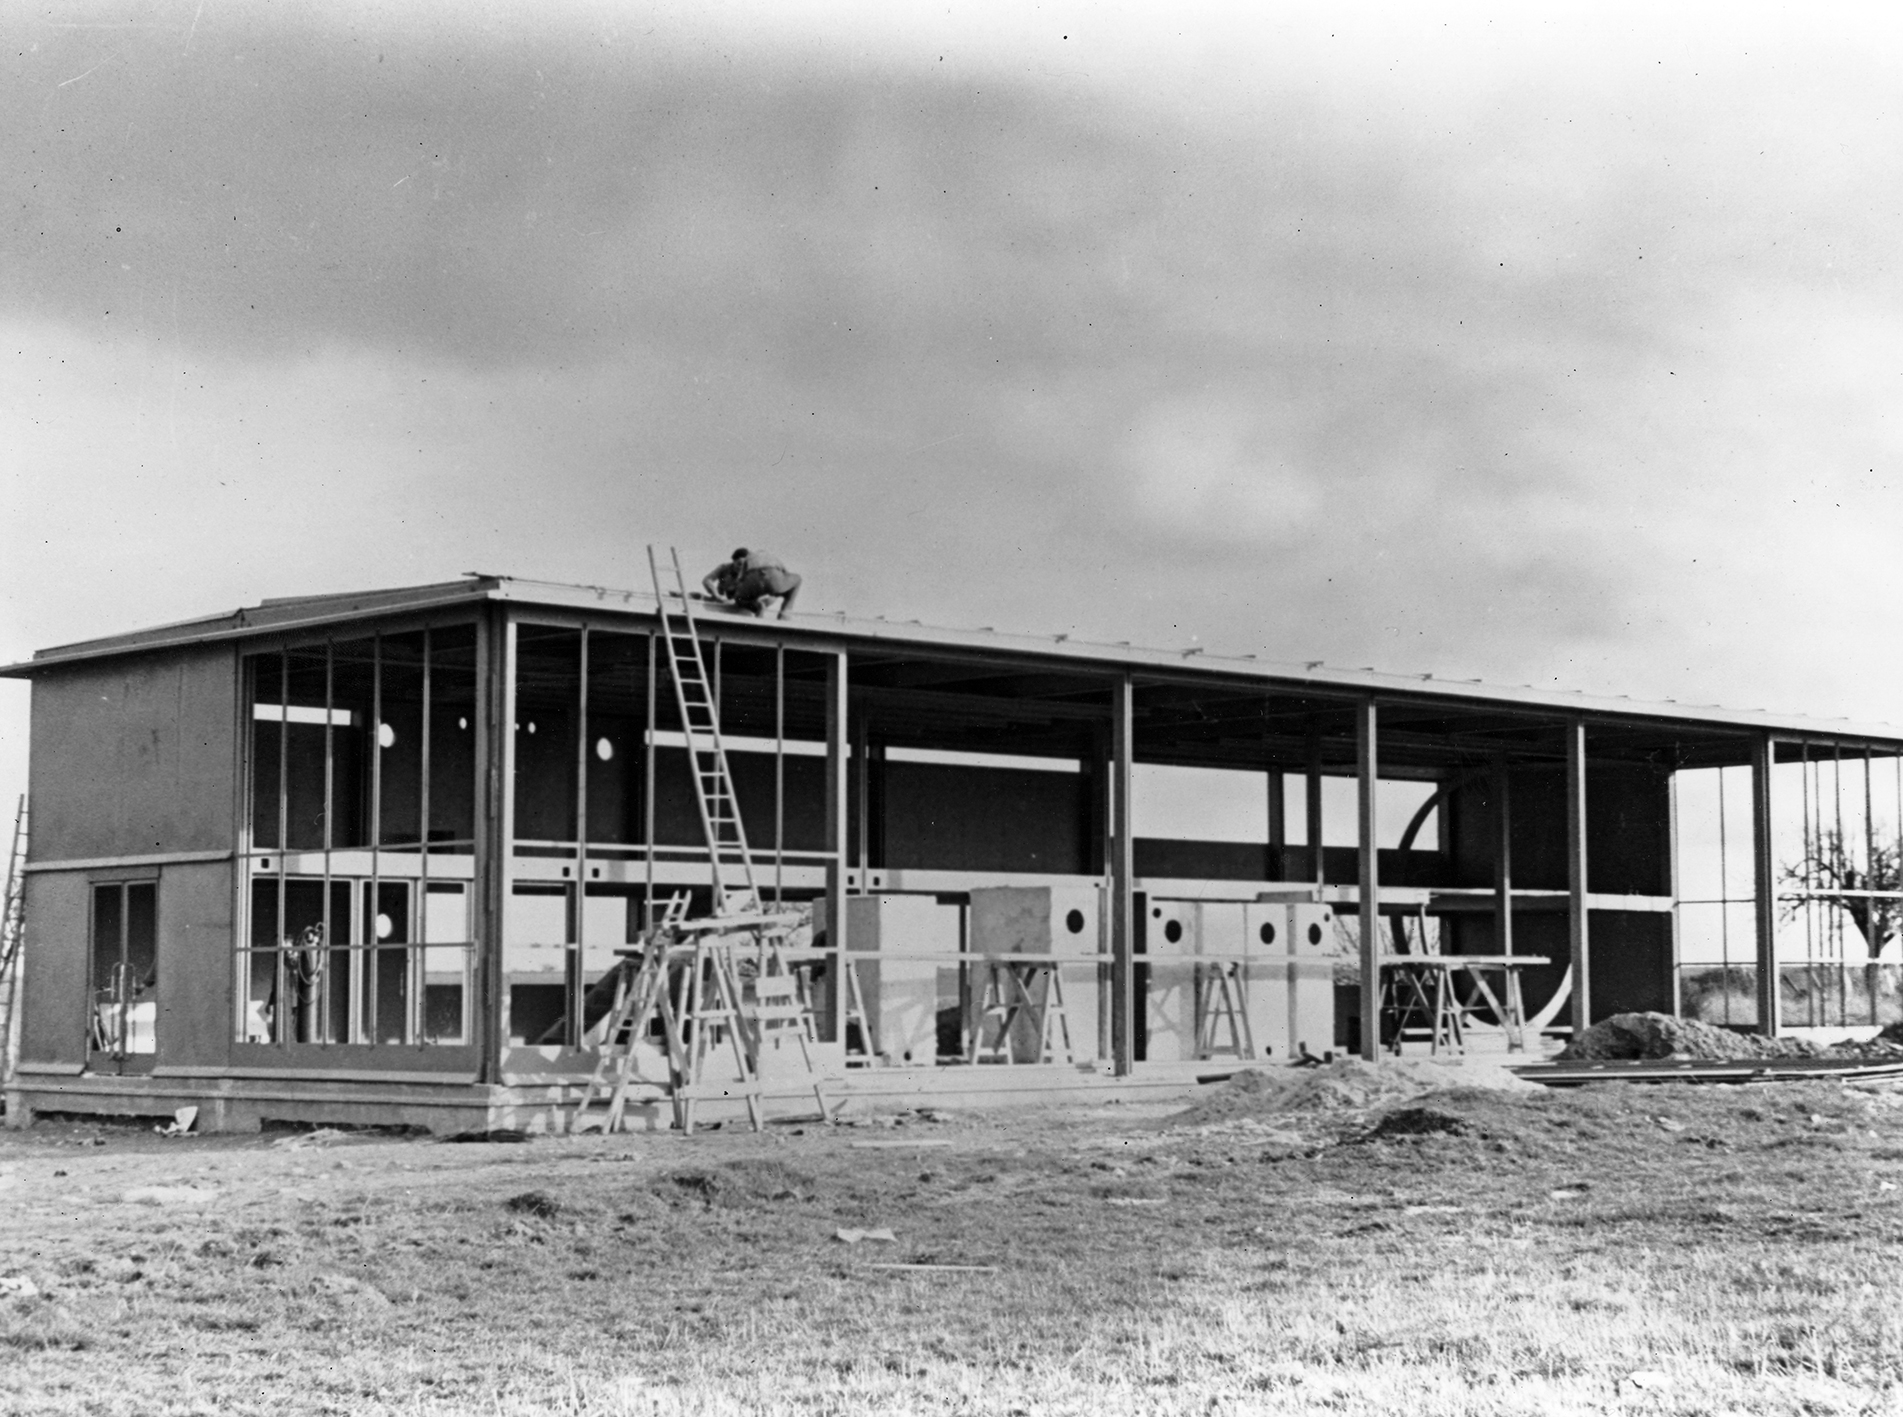 Roland Garros Flying Club (Jean Prouvé, with architects Eugène Beaudouin and Marcel Lods). View of the building site, Buc, 1935.